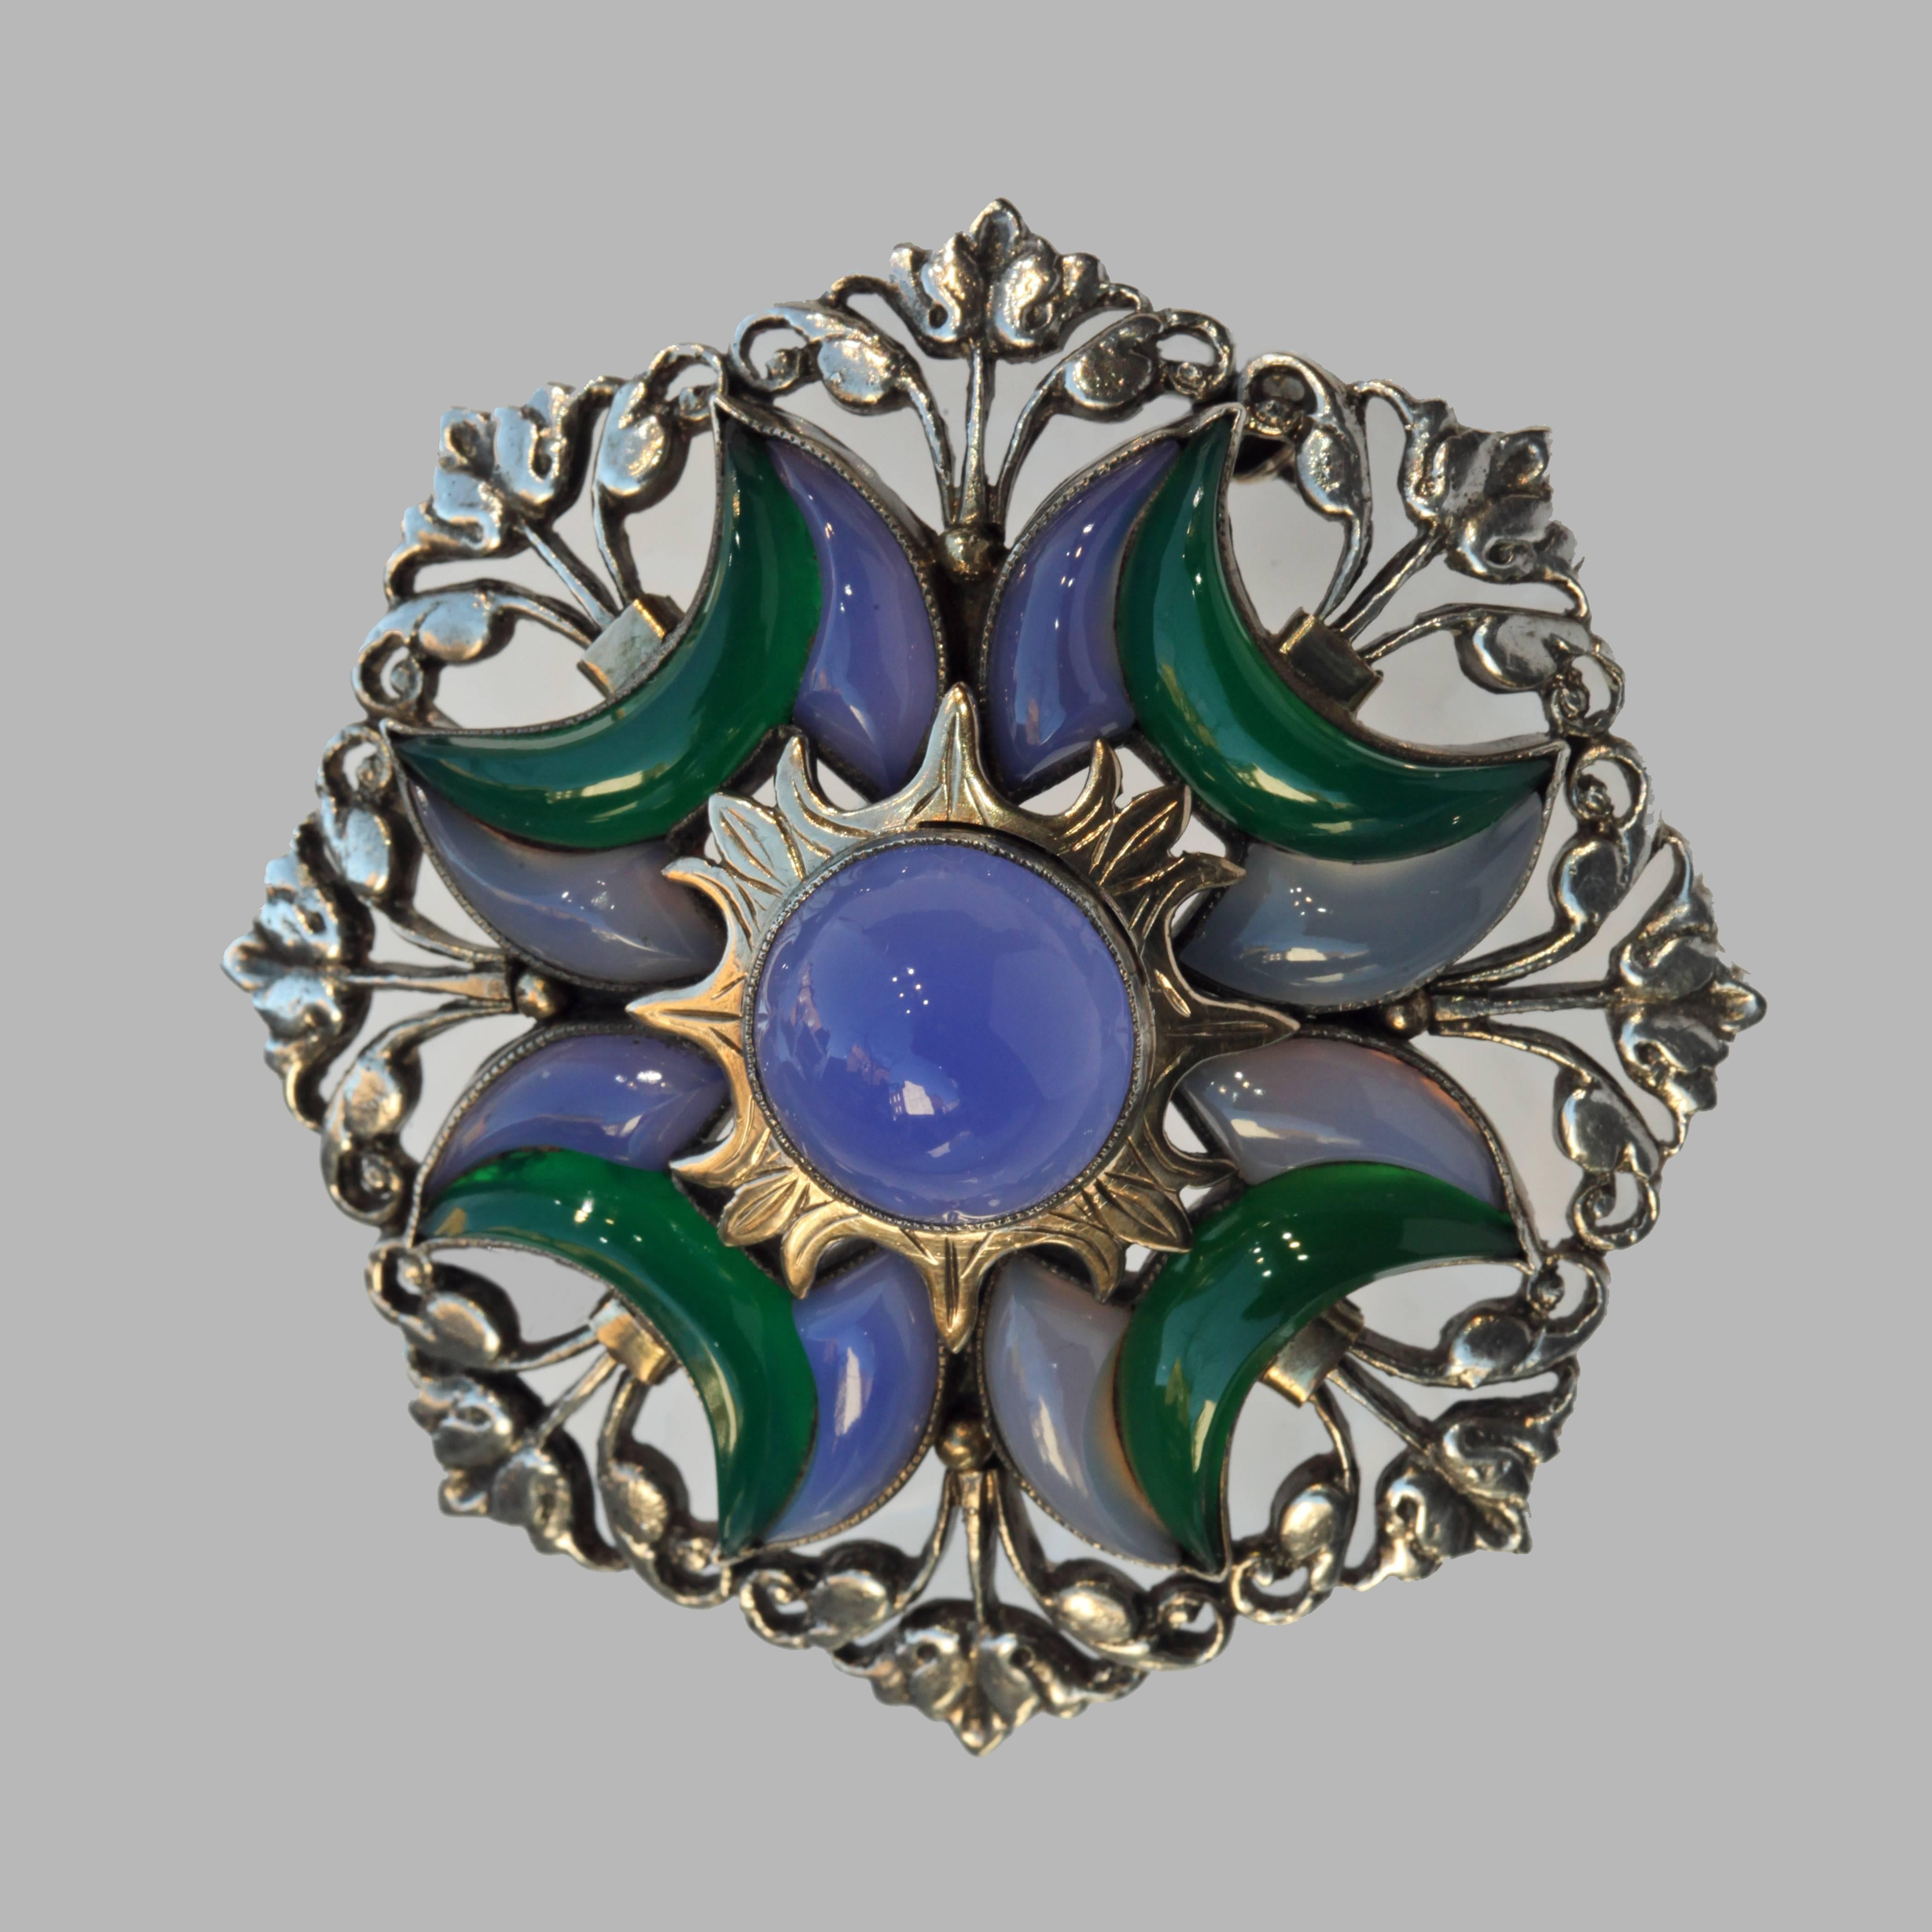 A very fine early Sibyl Dunlop brooch of striking & rare design. The Octagonal form encompasses a Mughal design of an eclipsed sun surrounded by crescent moons of blue & green chalcedonies.